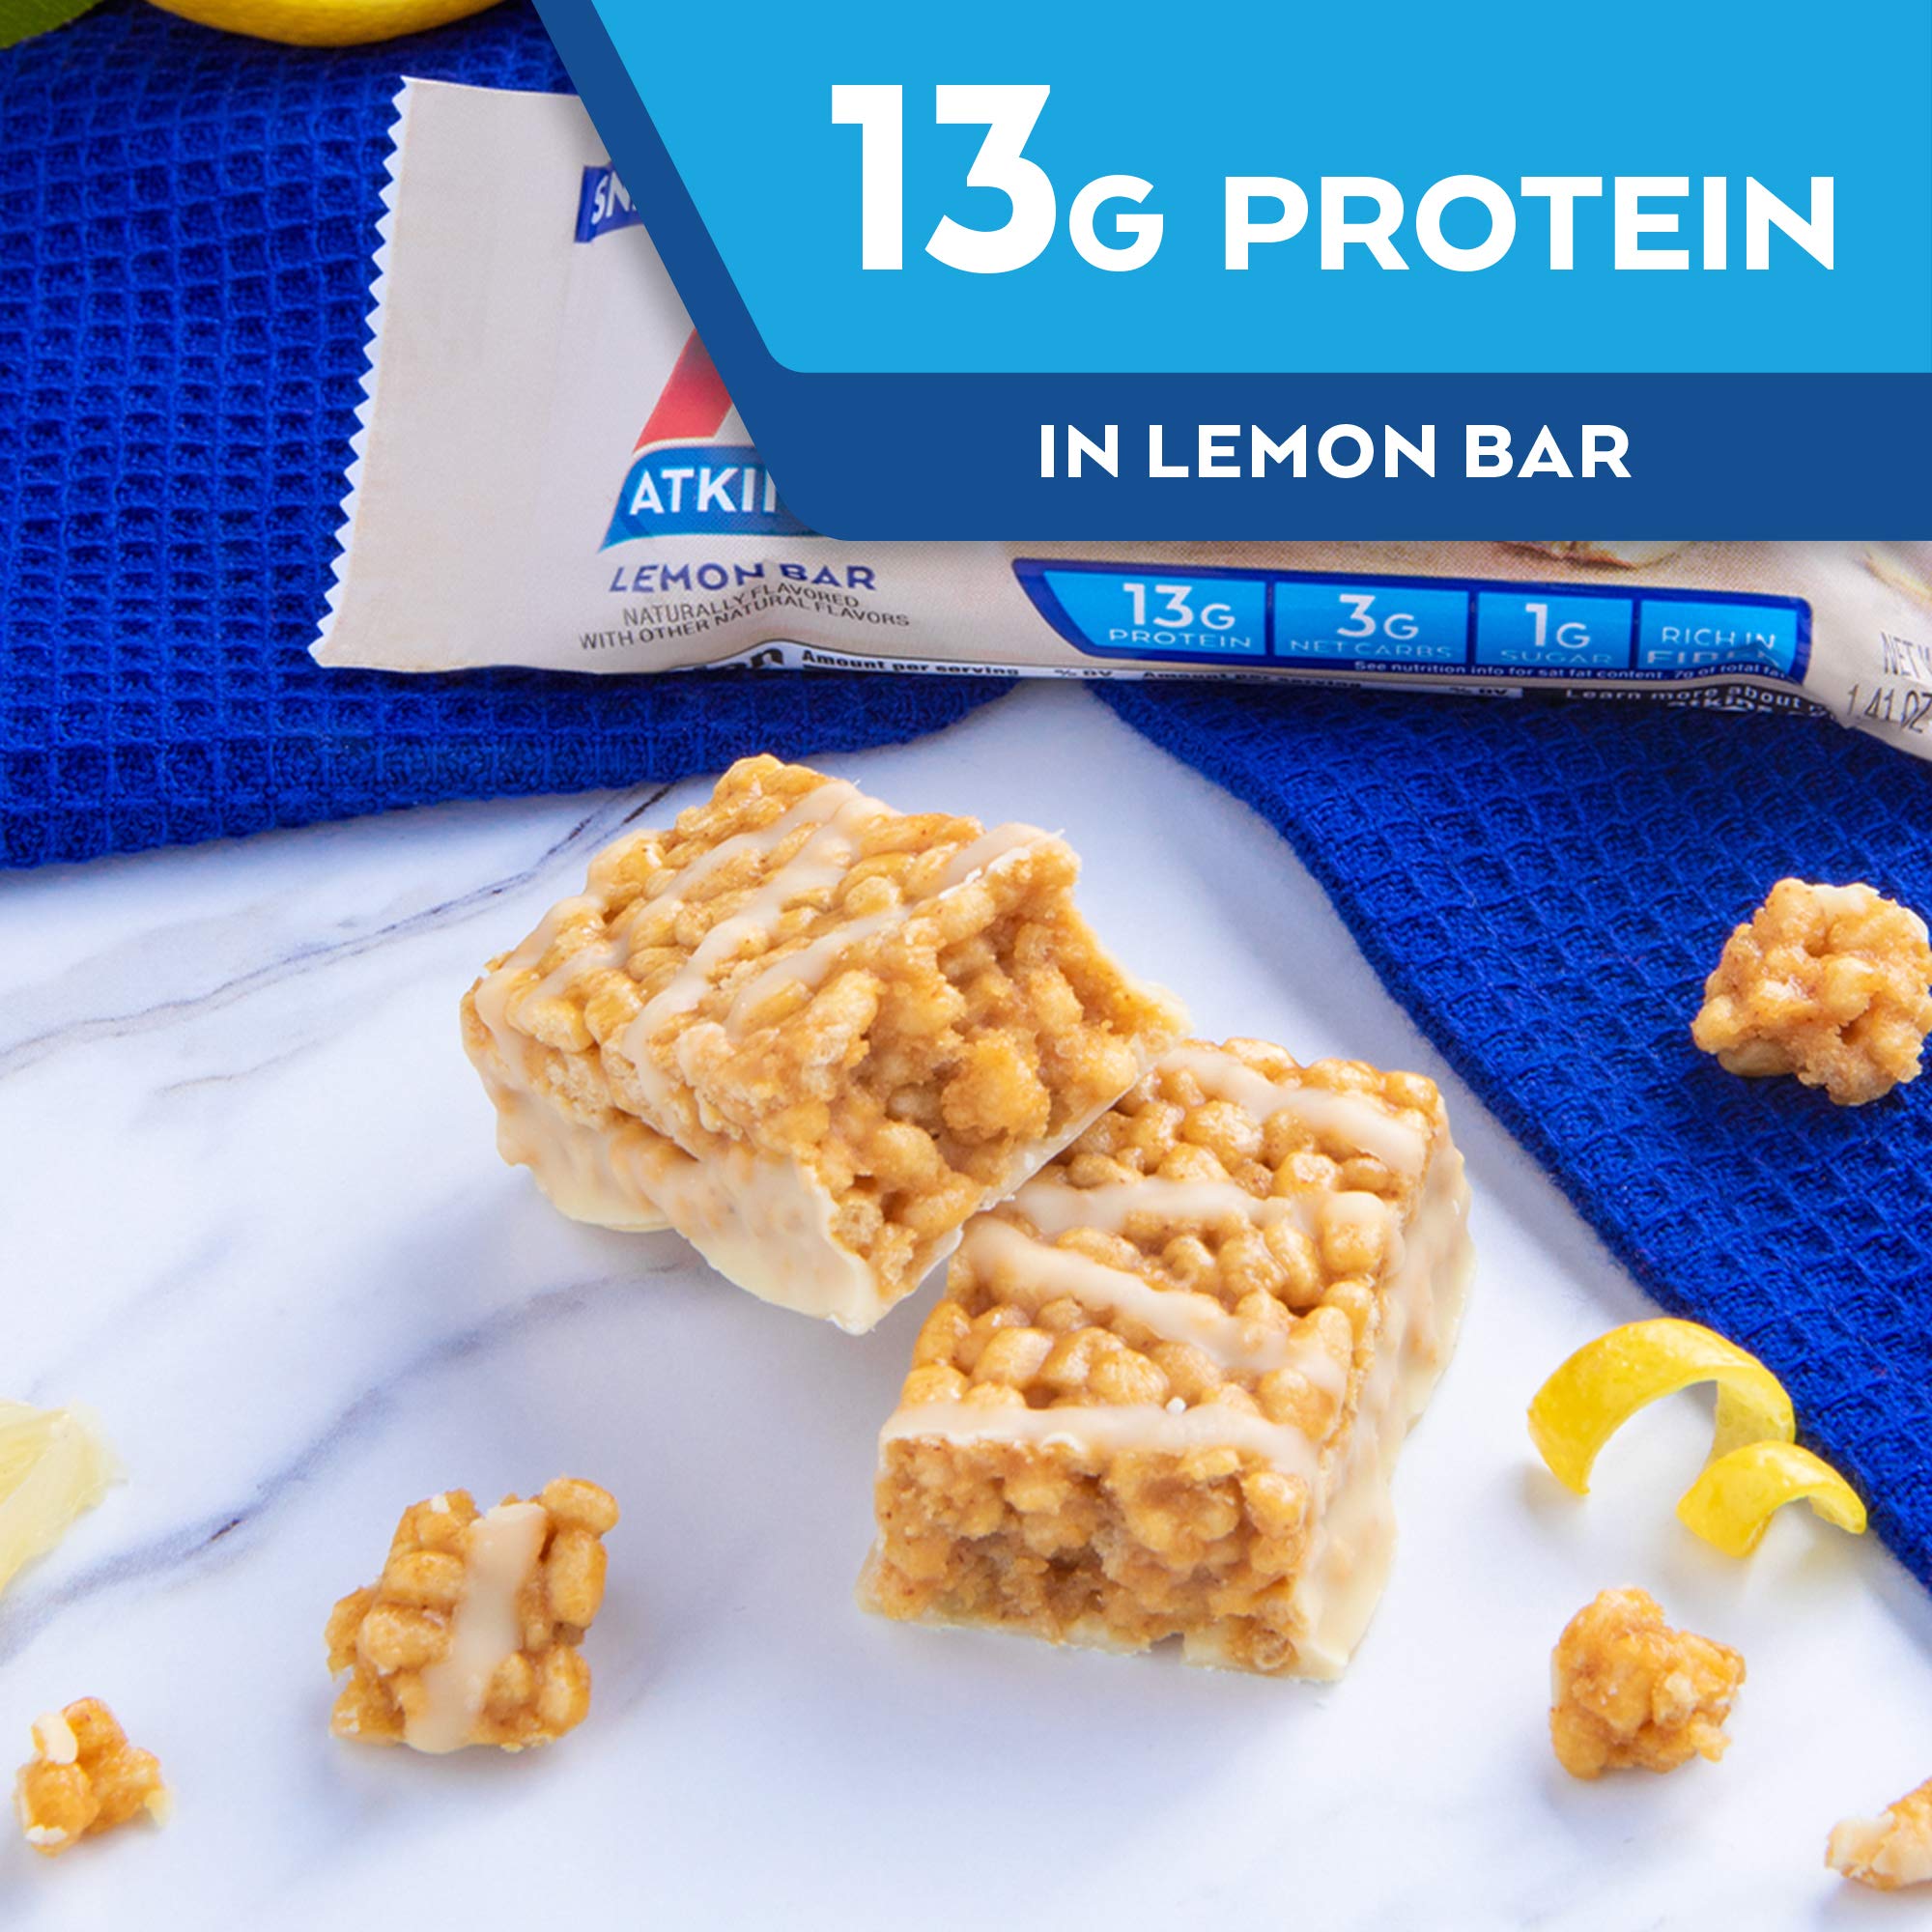 Atkins Lemon Snack Bar, Made with Real Almond Butter, 1g Sugar, Gluten Free, High in Fiber, Keto Friendly, 8 Count